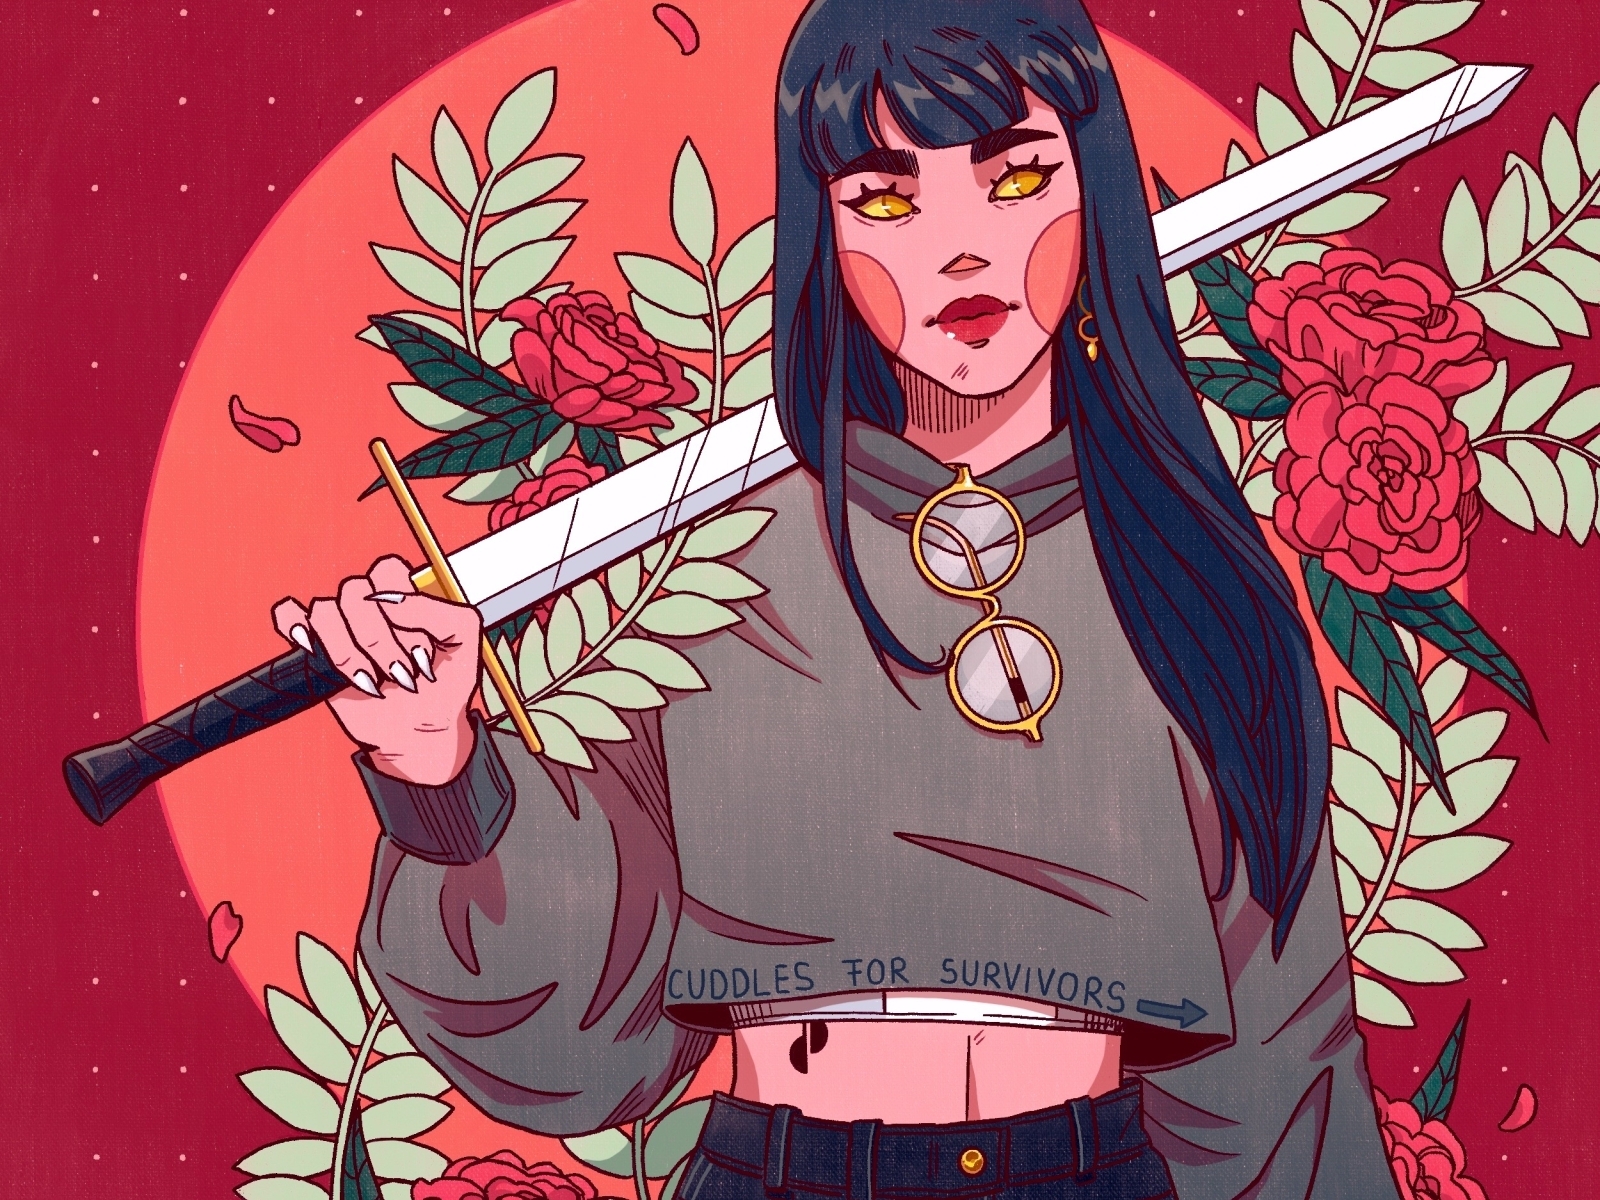 Sword and Flower by Karo Becker on Dribbble